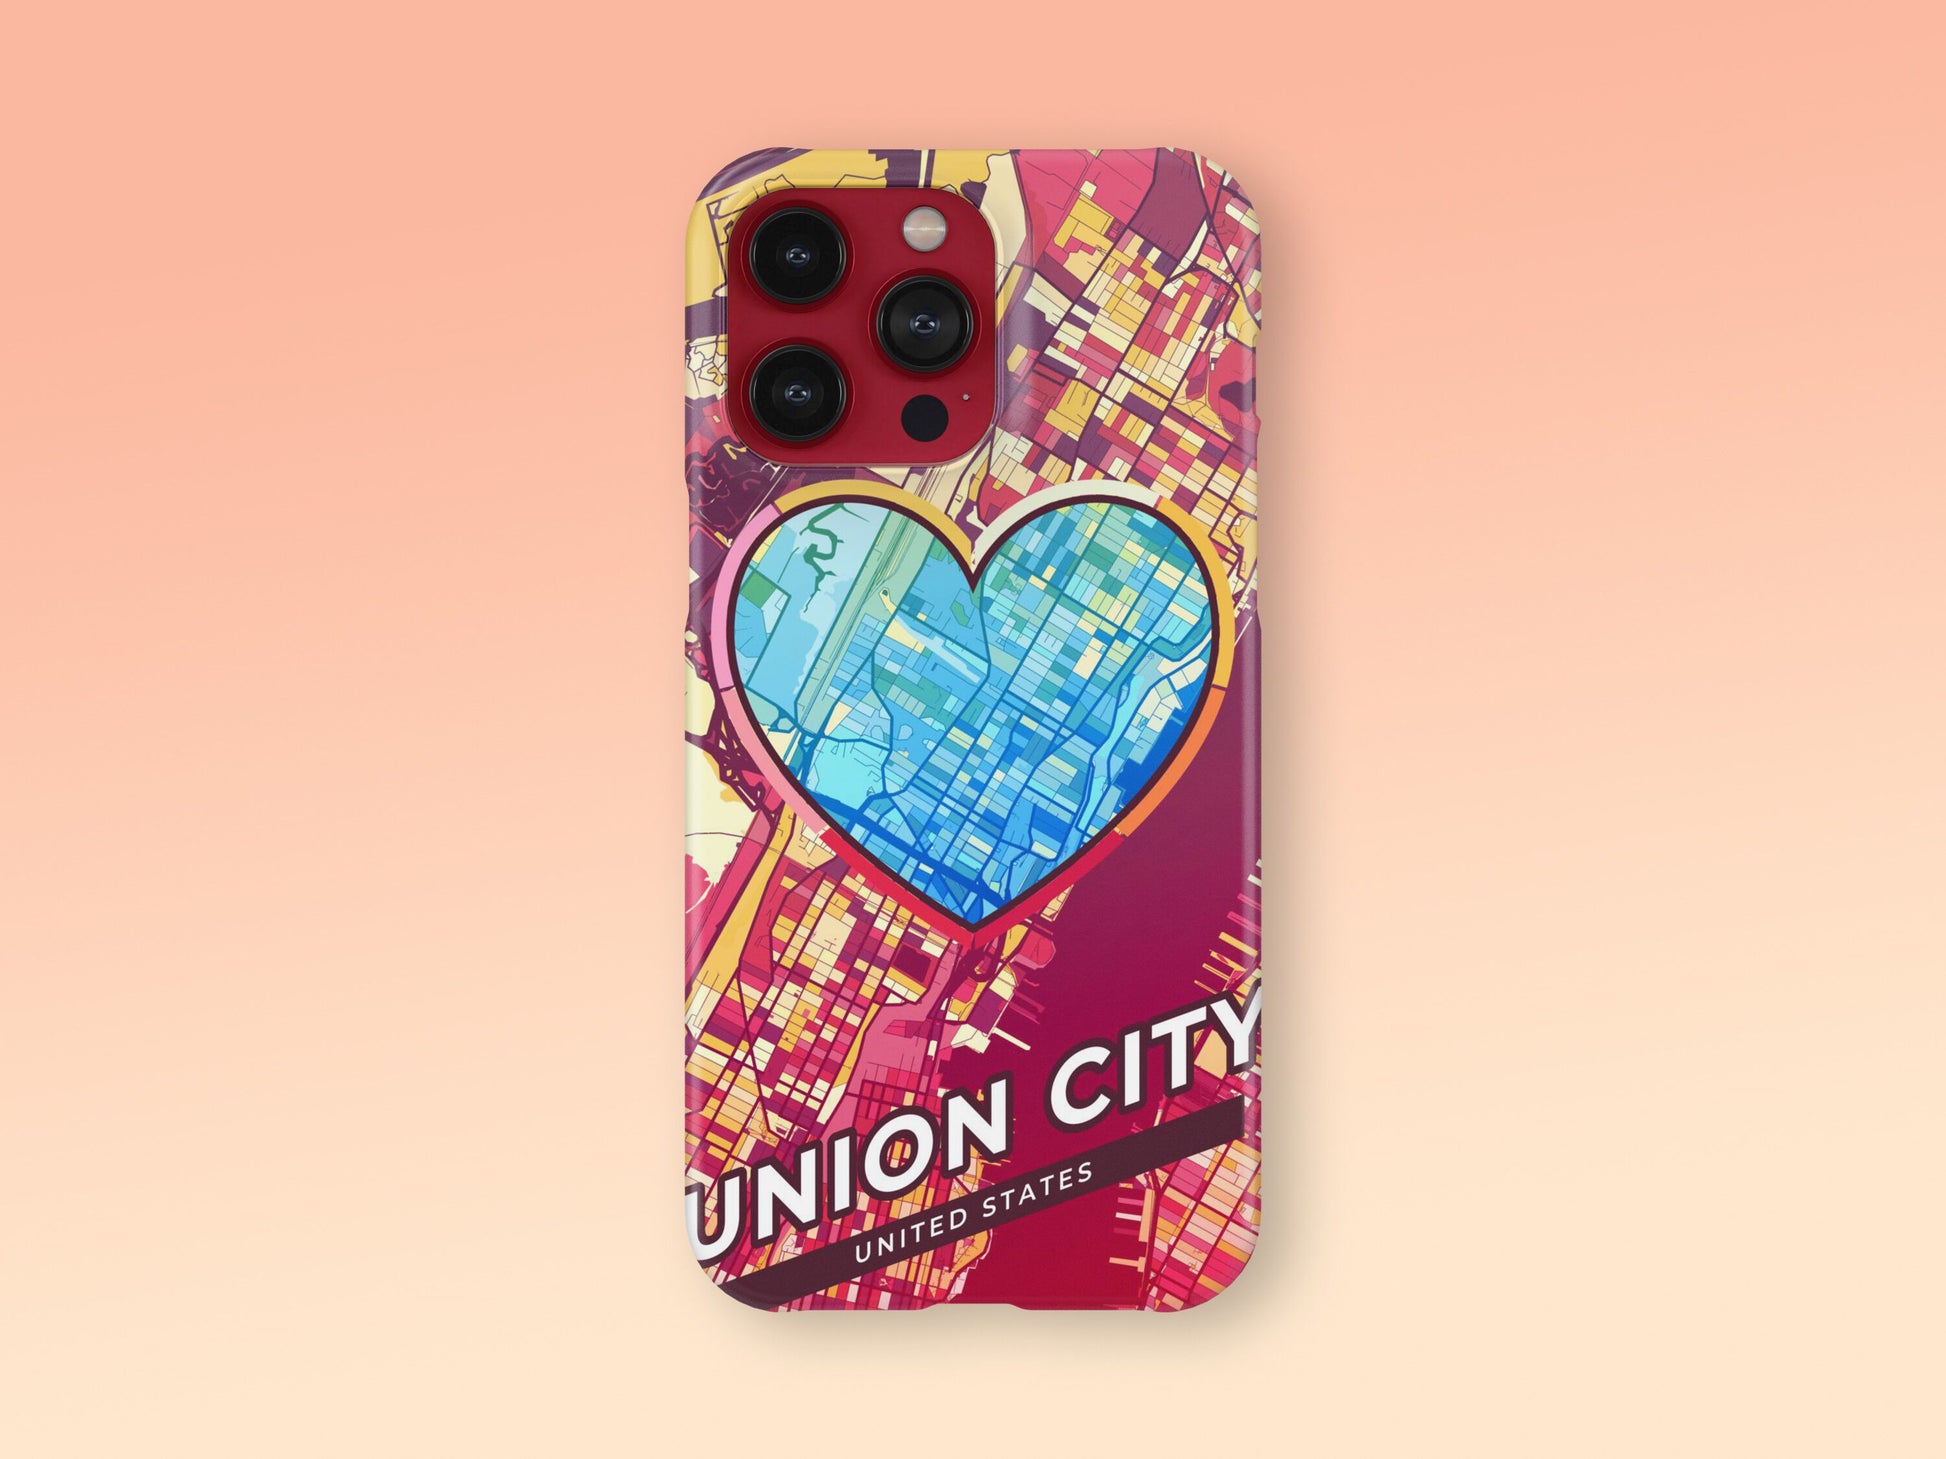 Union City New Jersey slim phone case with colorful icon 2